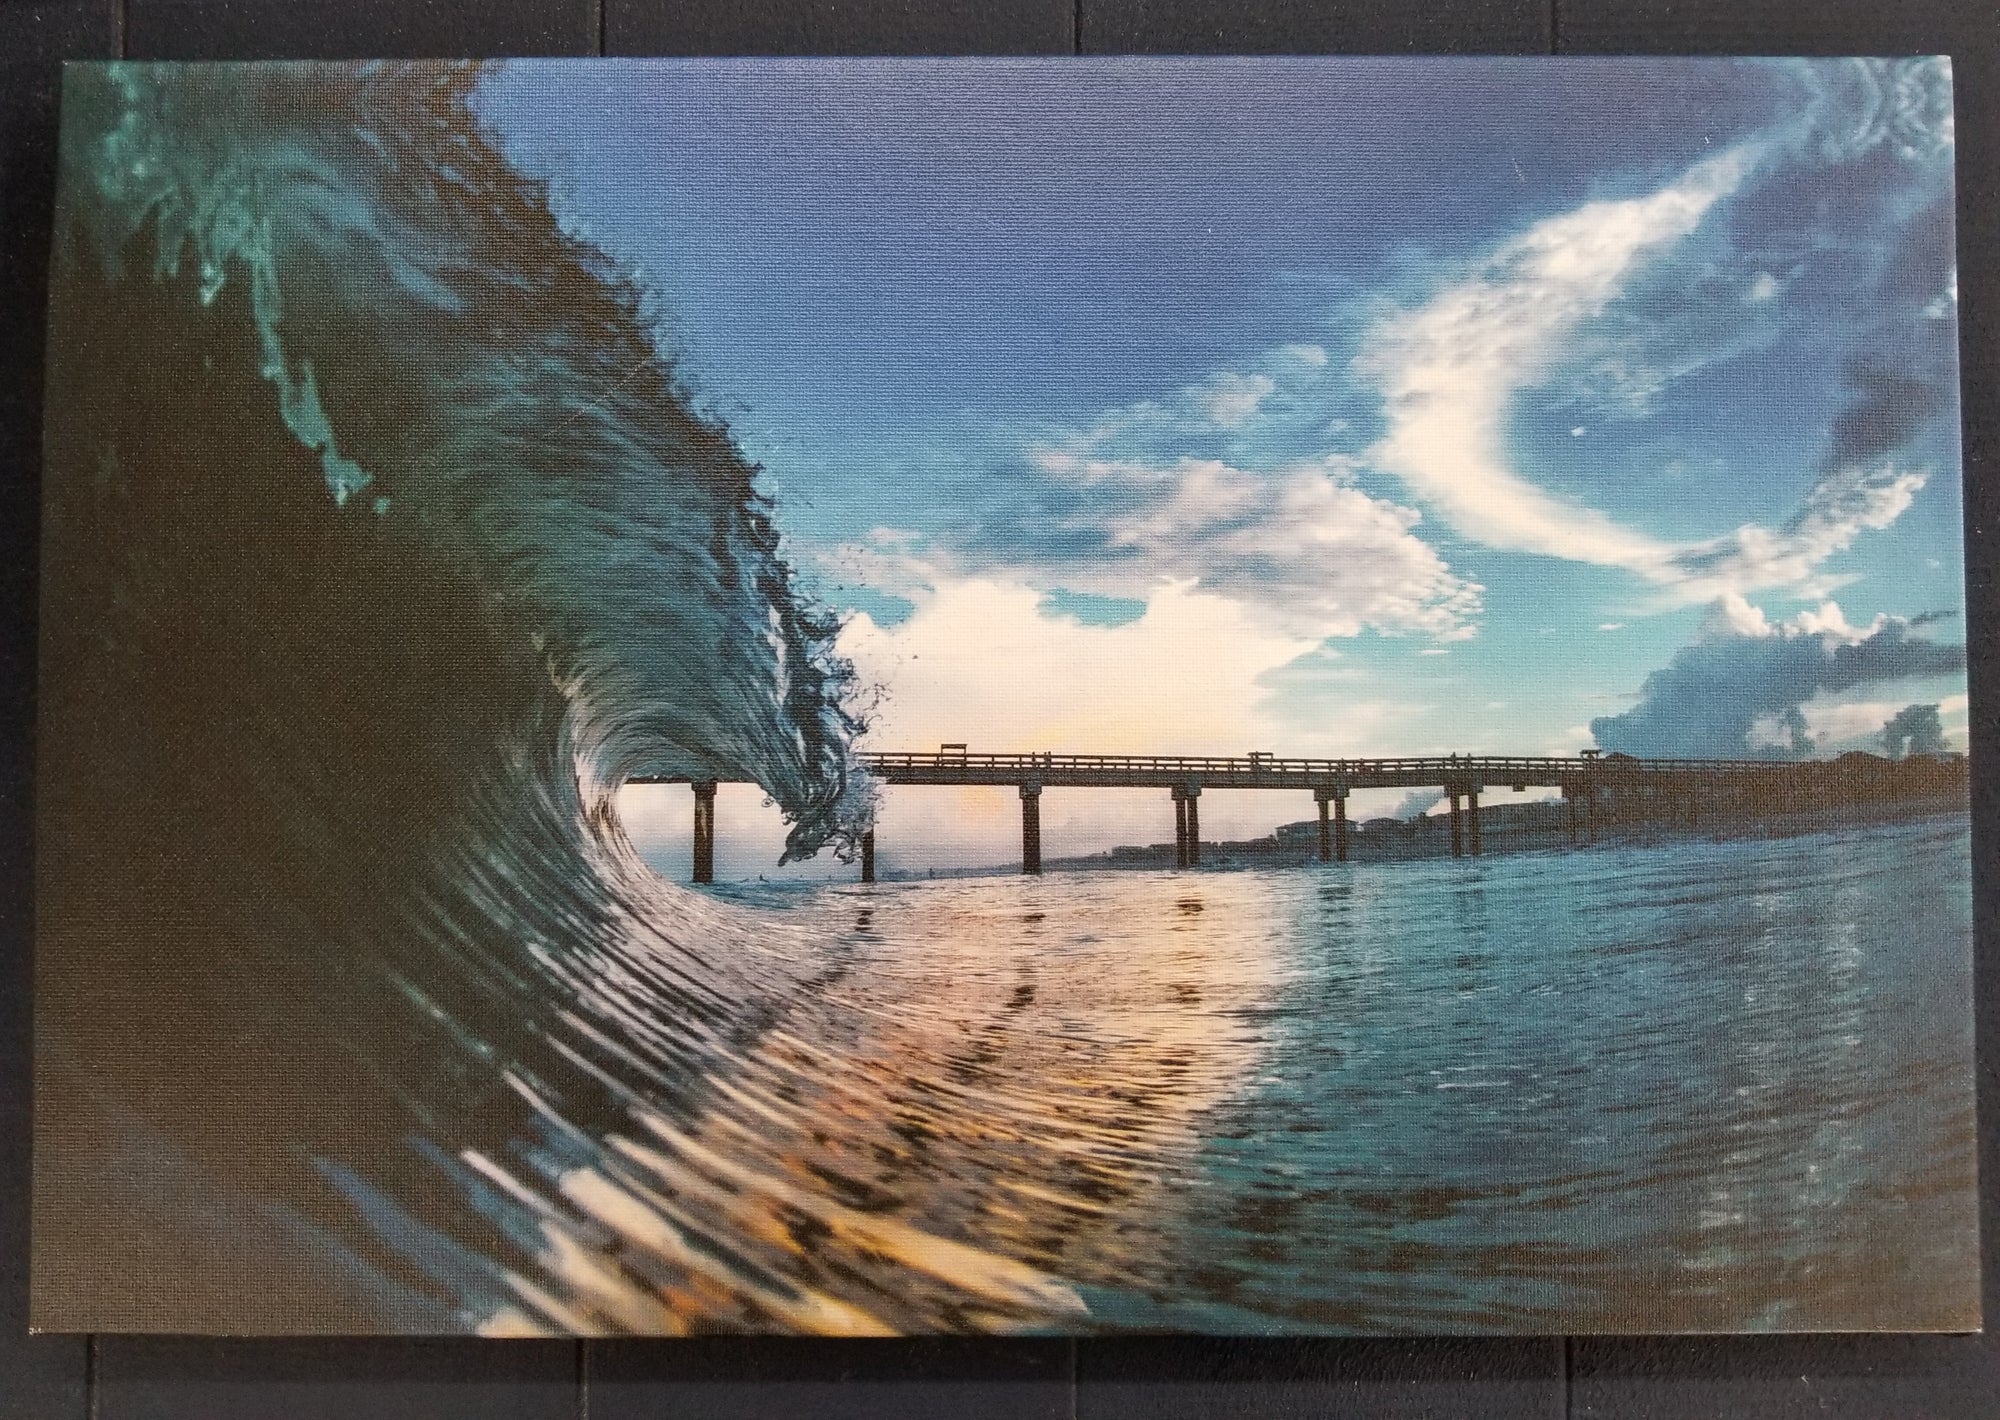 St Augustine Beach Water Colors 12"x18" Canvas Surf Print by Jared Jeffs